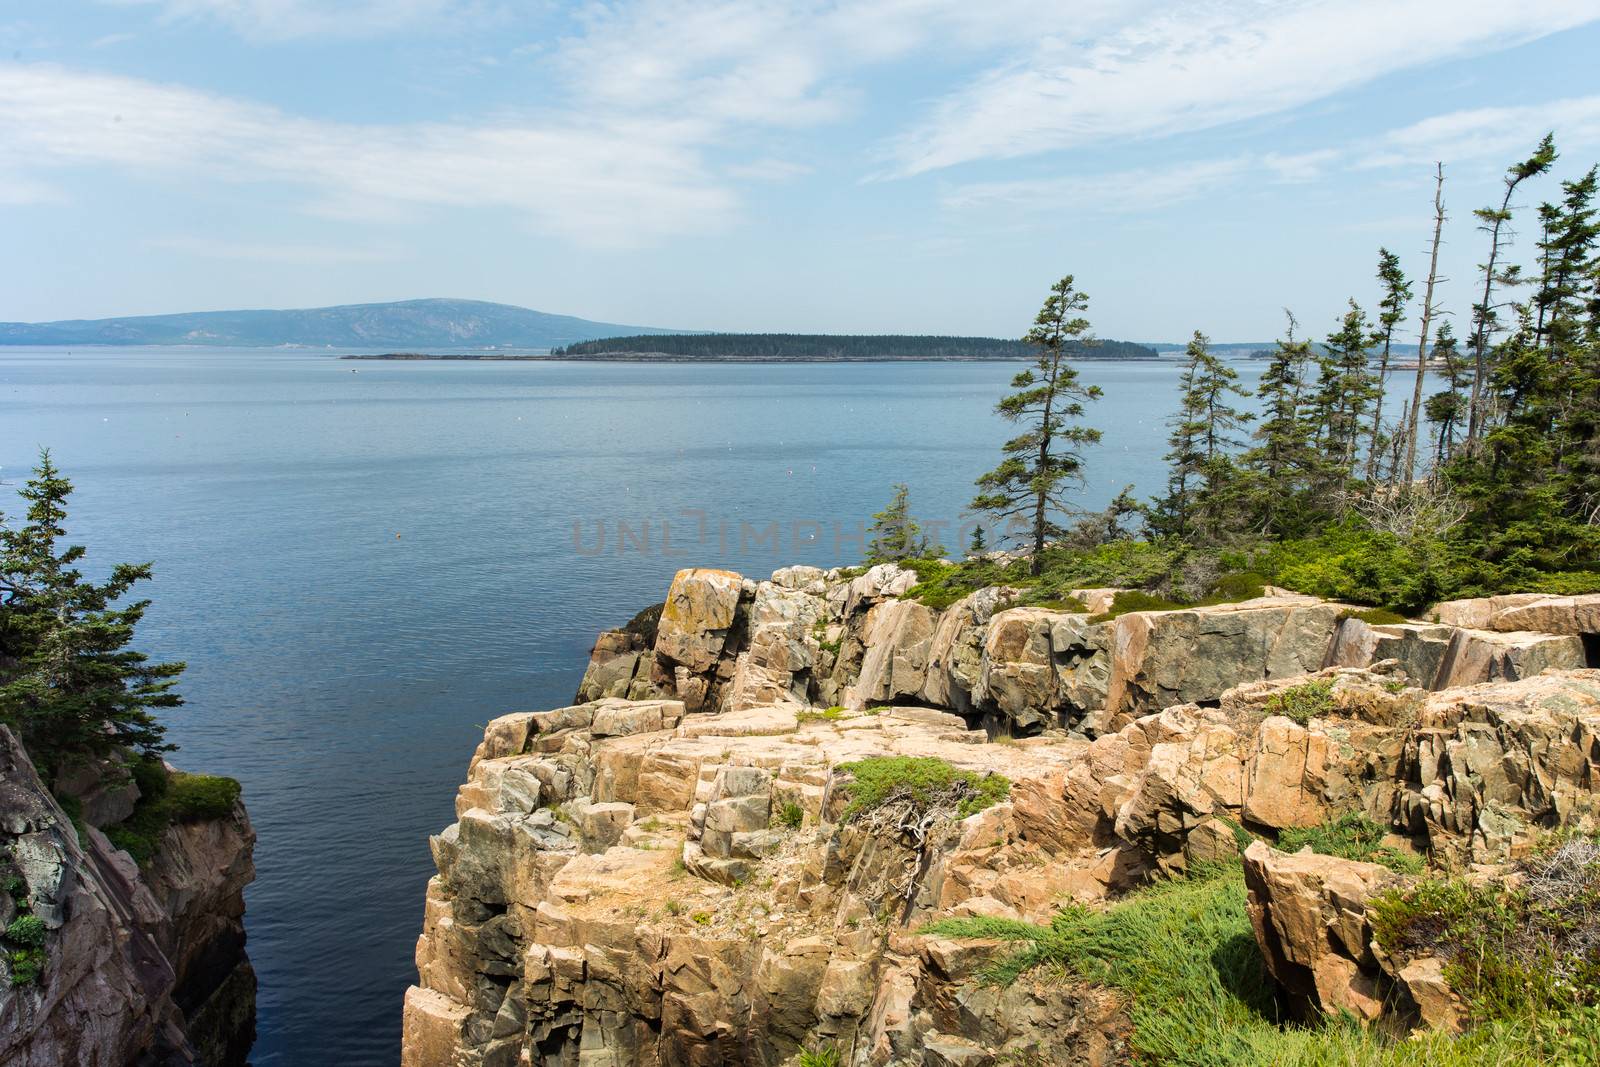 This image shows the view from Raven's Nest on the Schoodoc Peninsula. In the far background is Mount Desert Island.